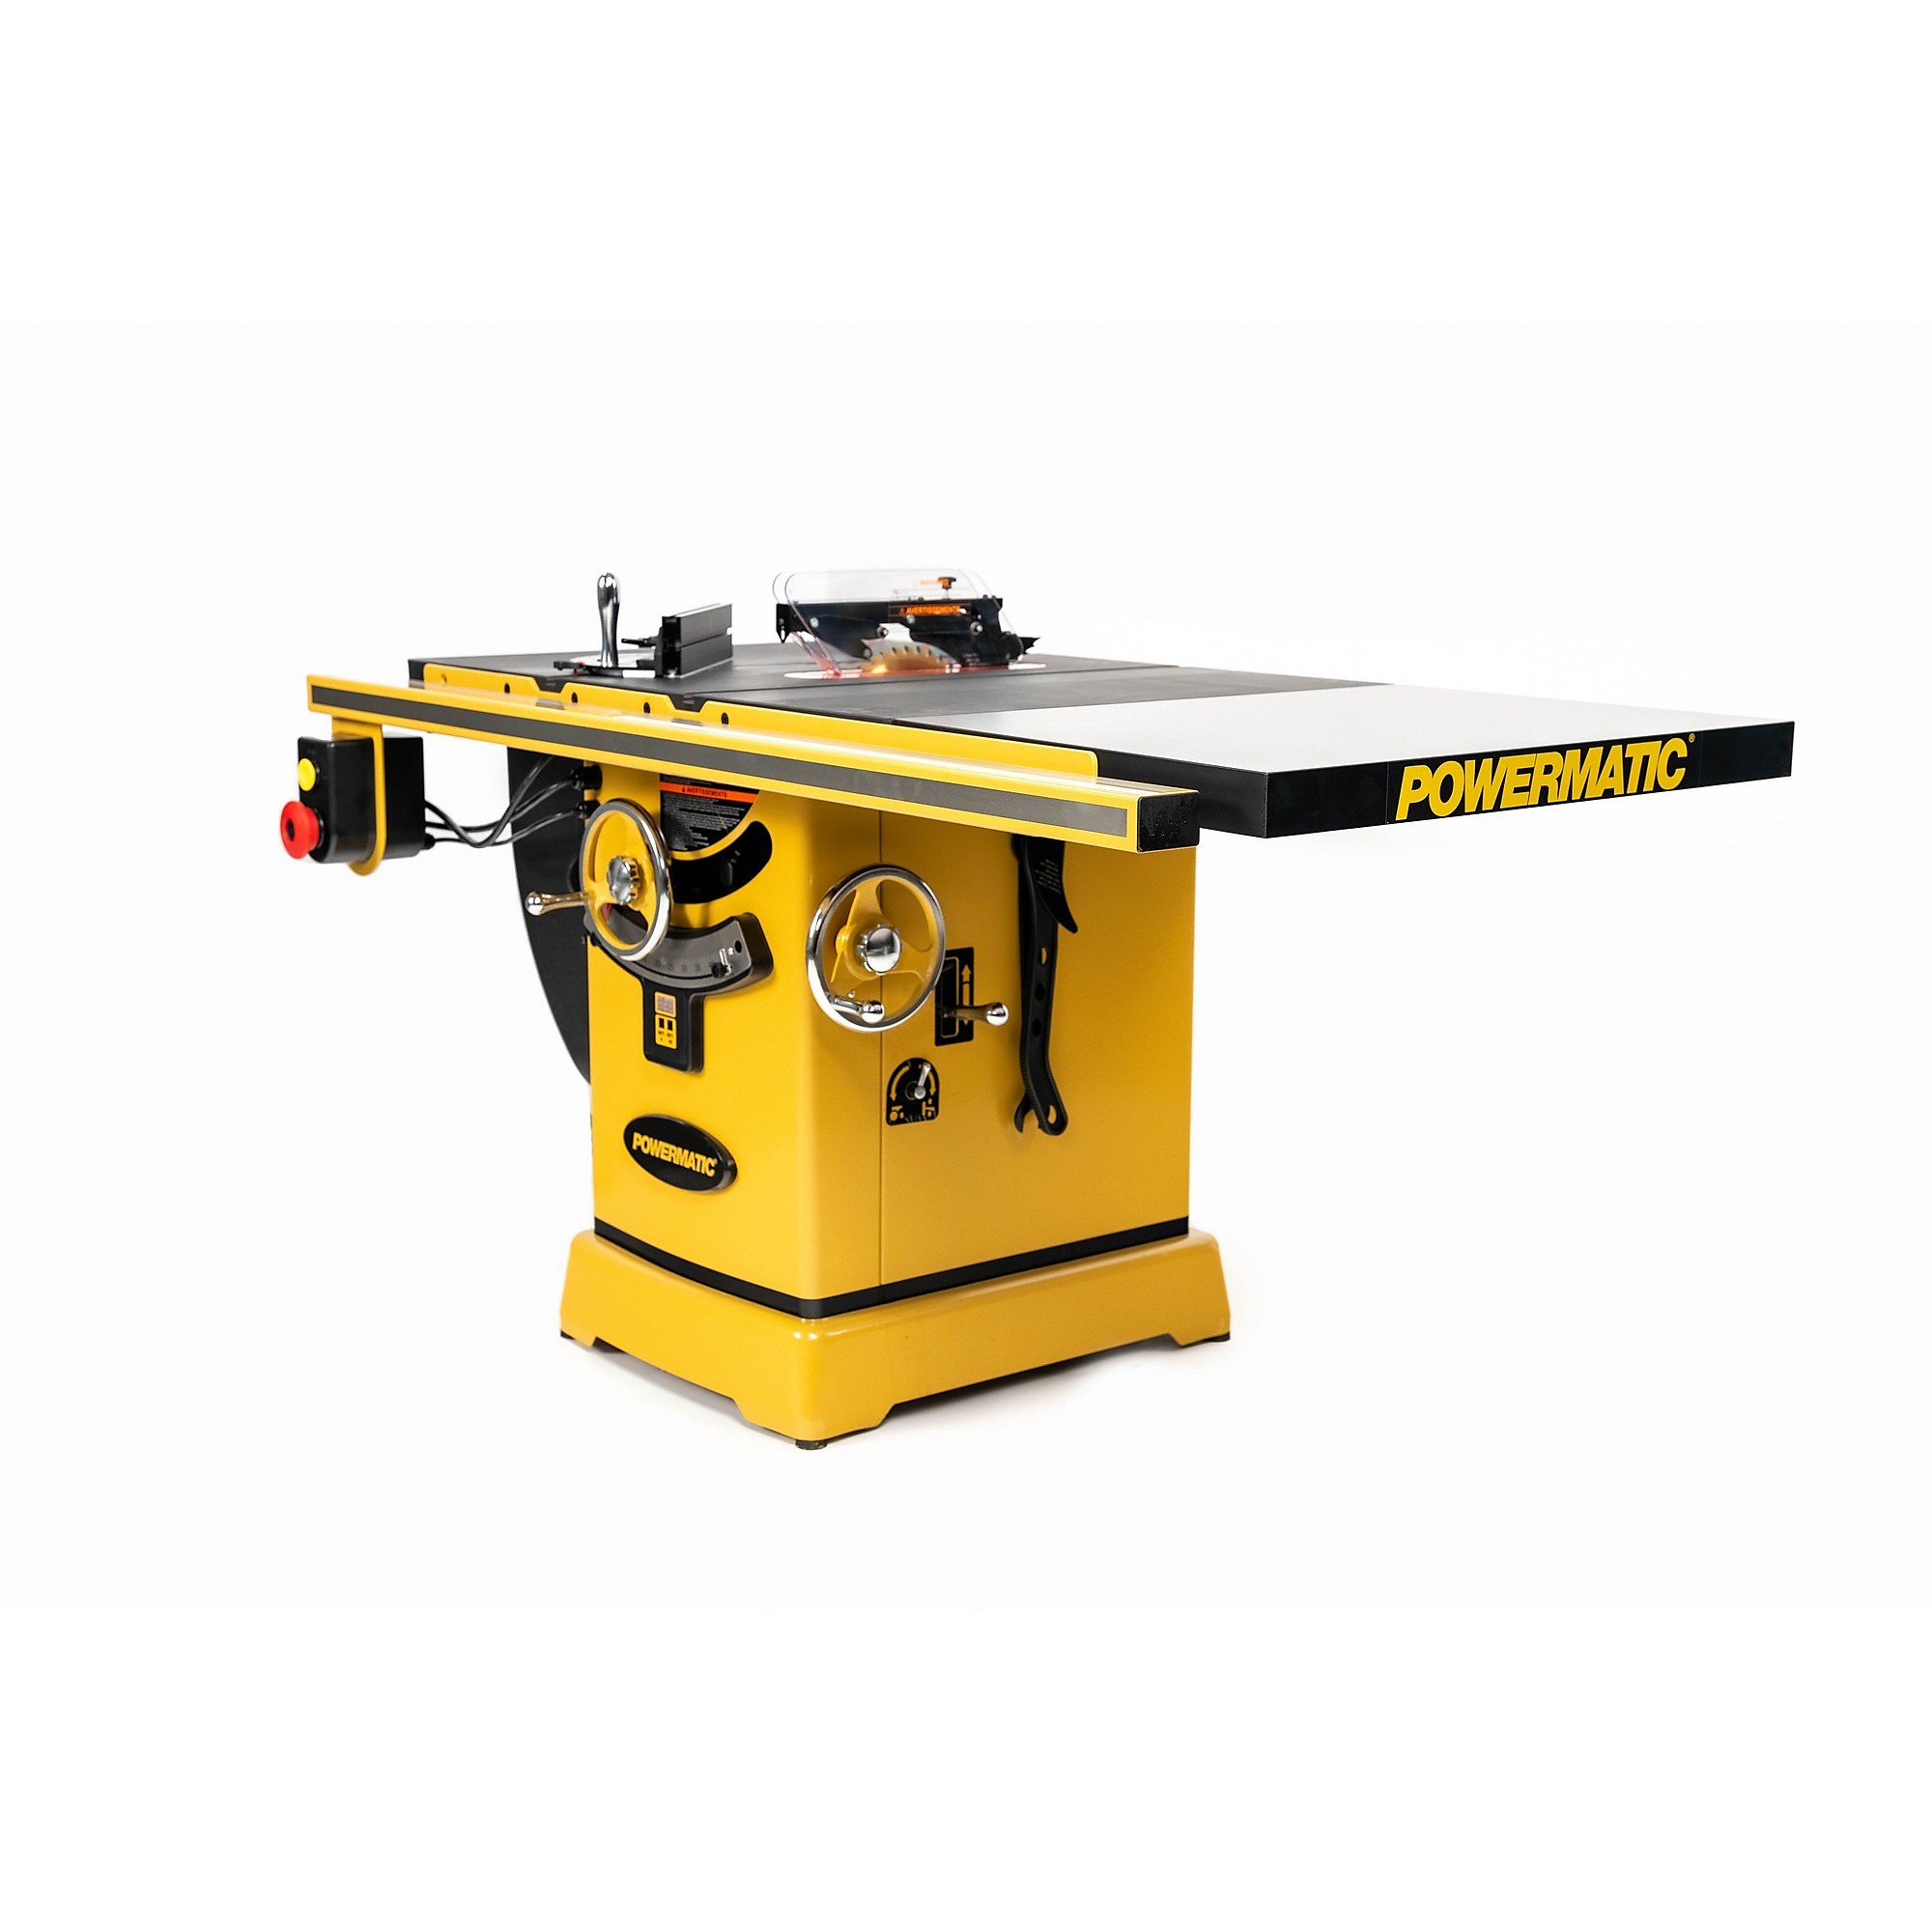 Powermatic, ArmorGlide Table Saw, Blade Diameter 10 Horsepower 3 HP, Volts 230 Model PM2000T